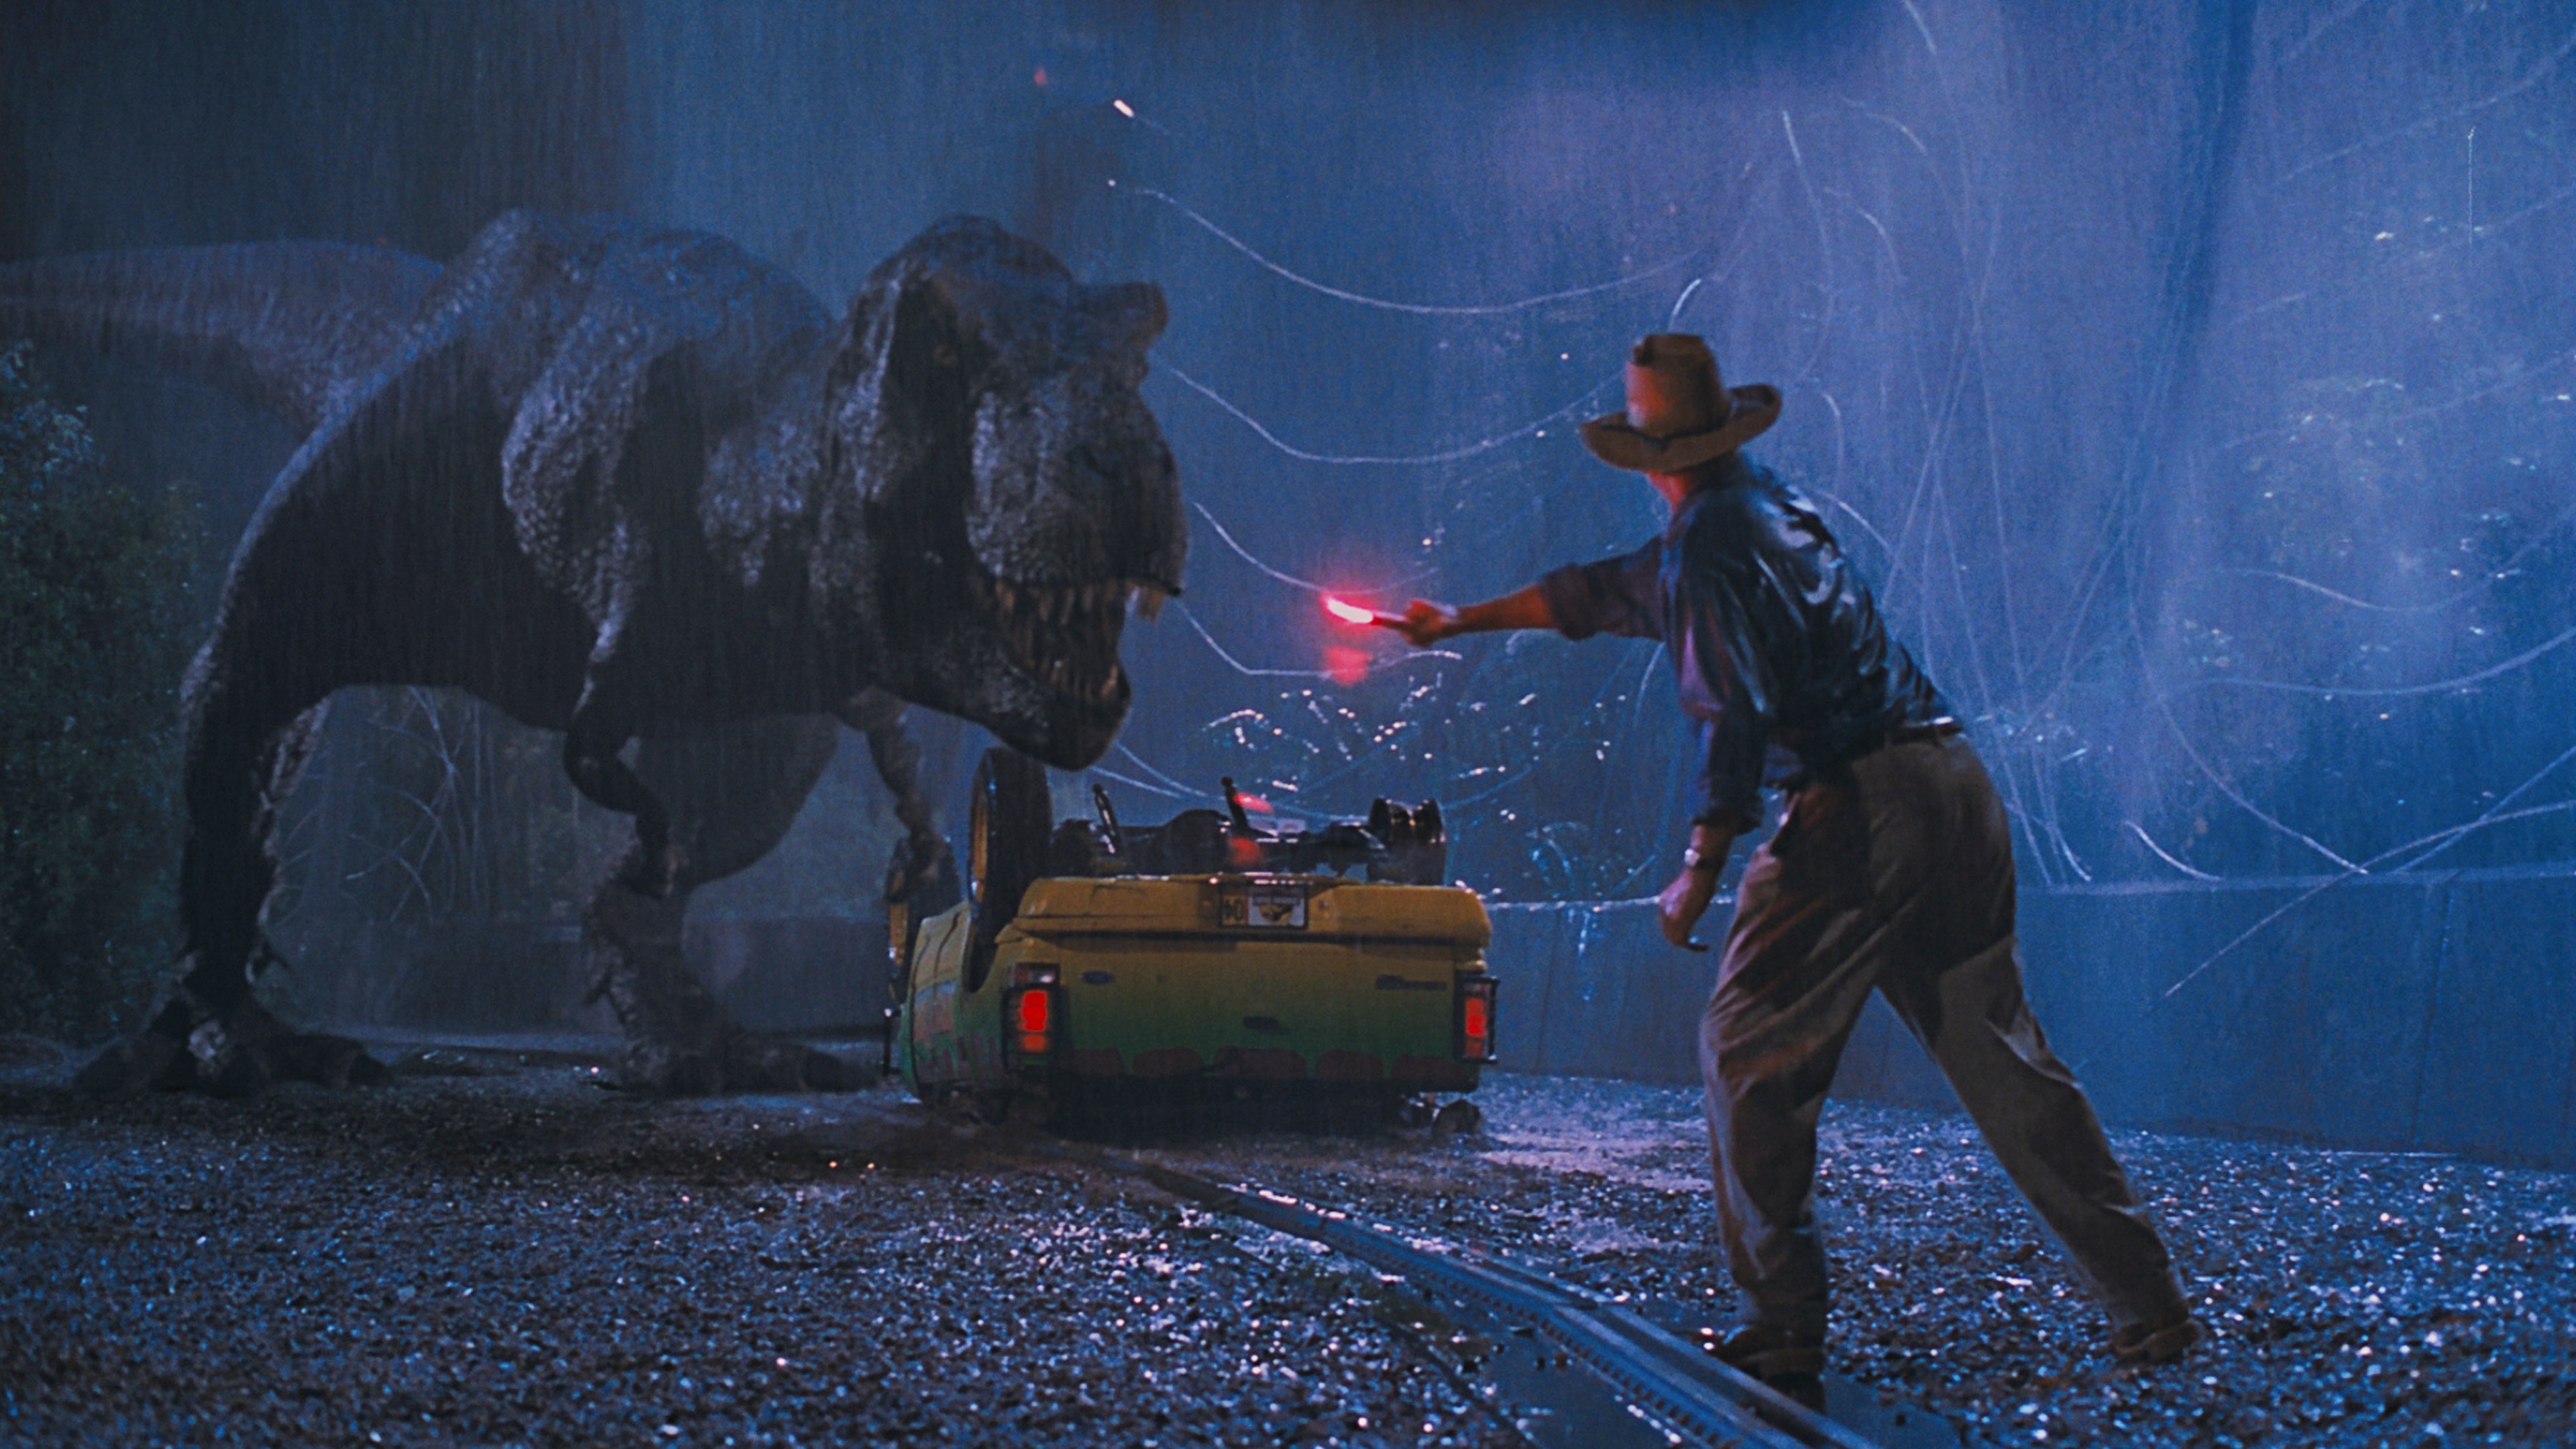 Review: Jurassic Park Collection (4K) - The Based Update